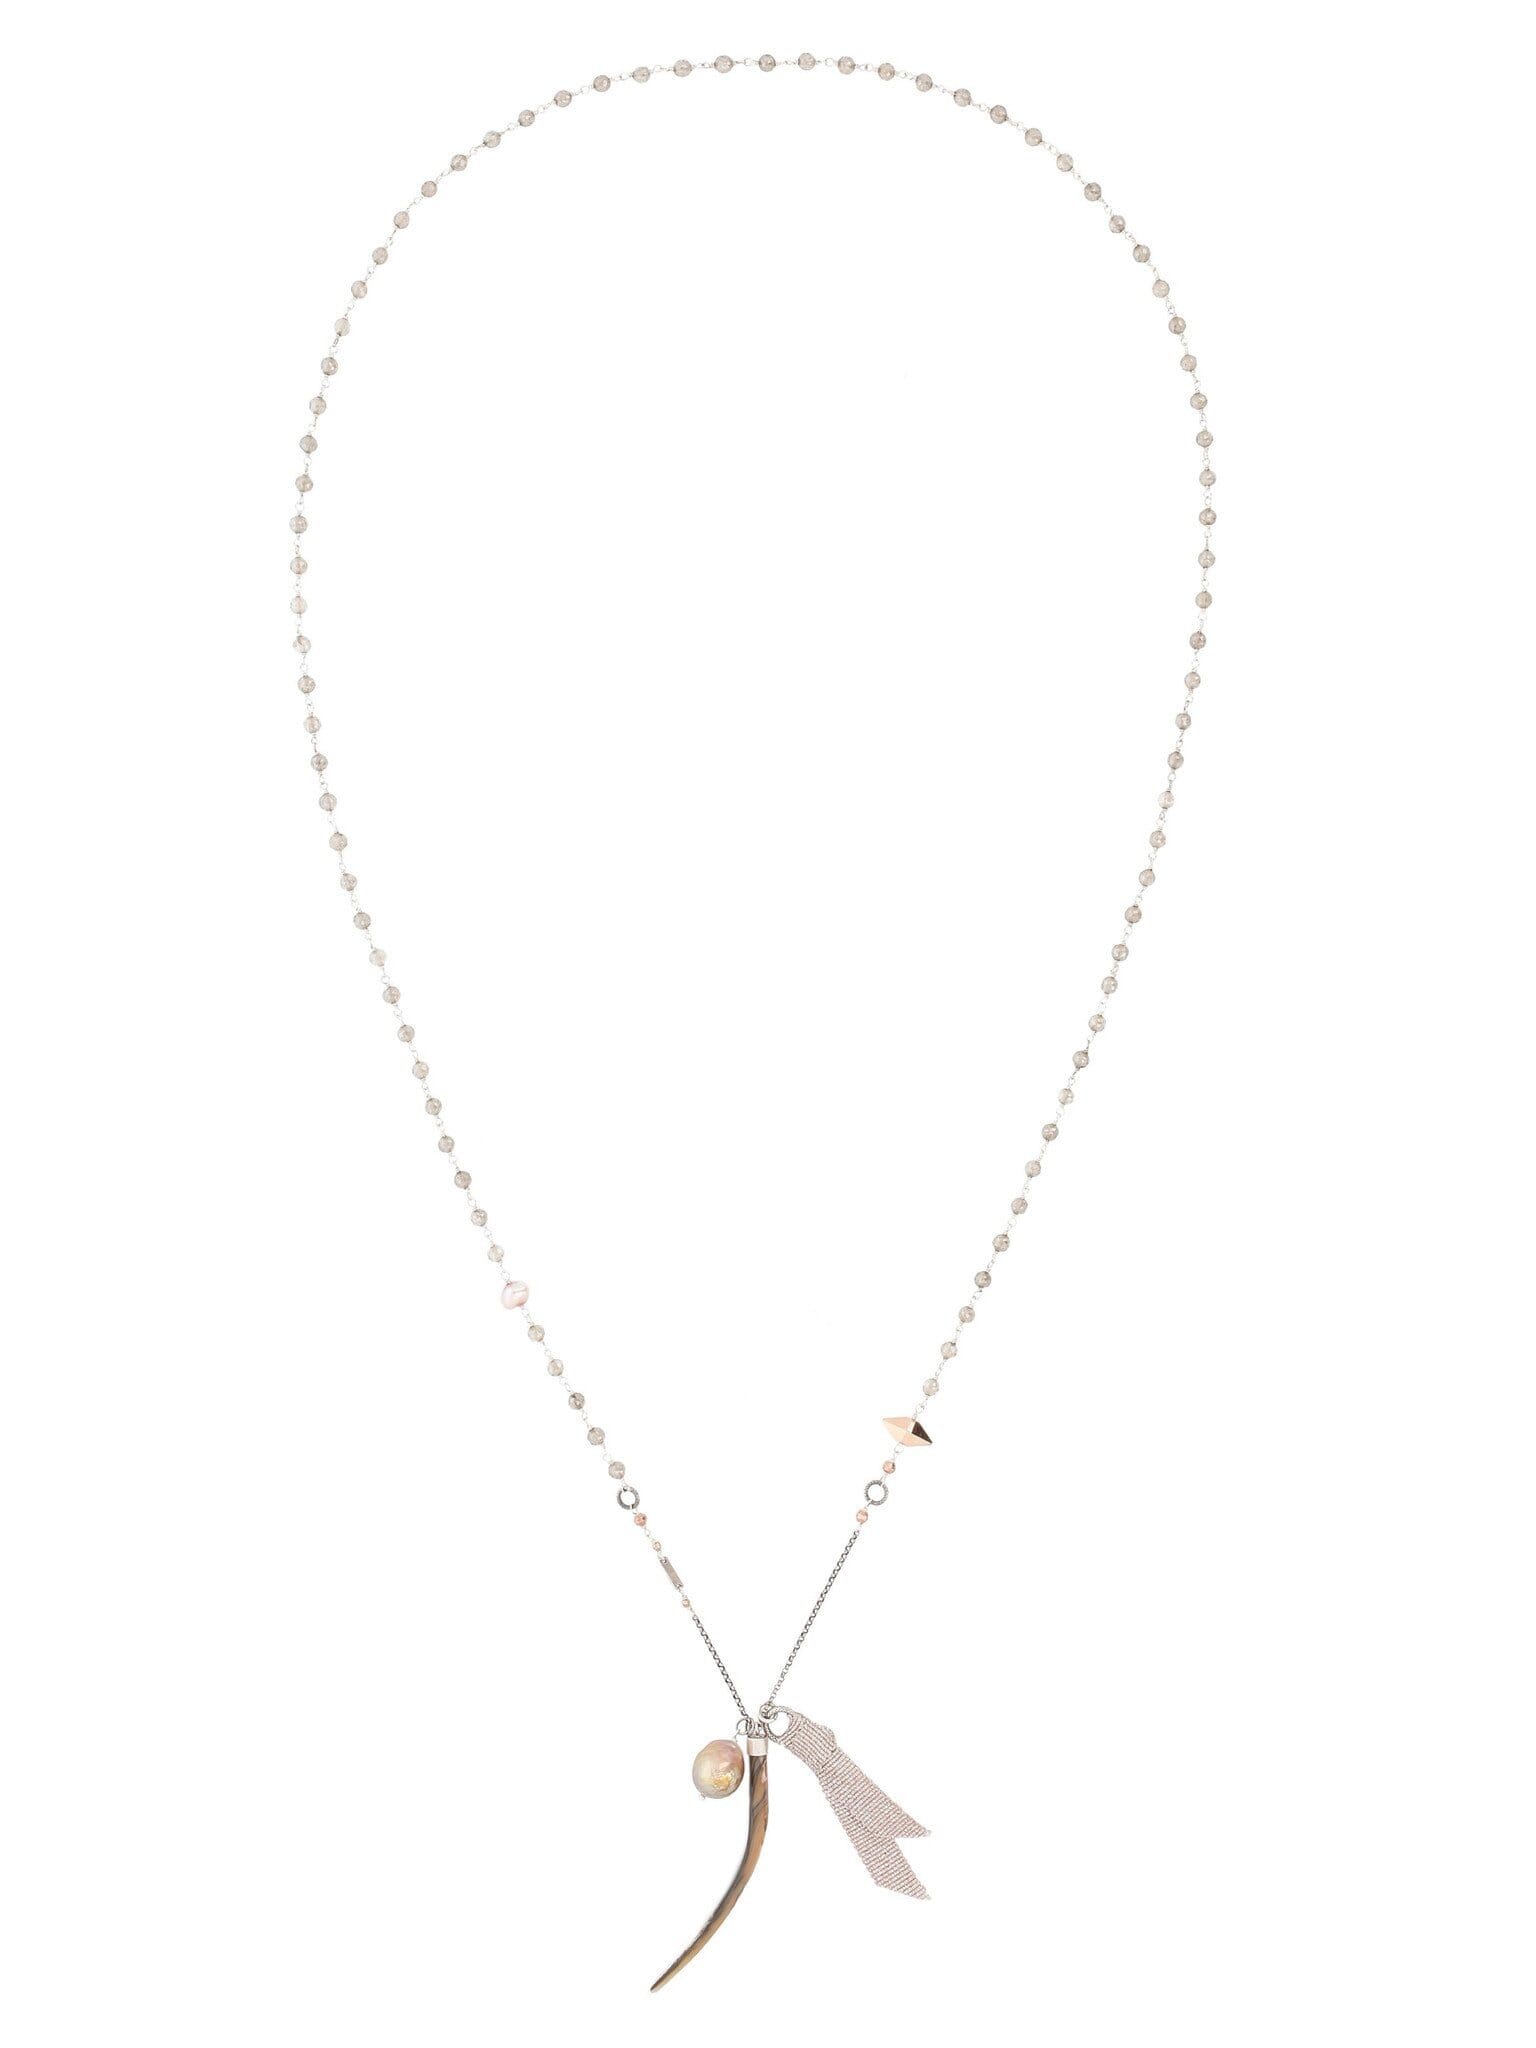 Chan Luu Mix Layering Charm Necklace in Mystic